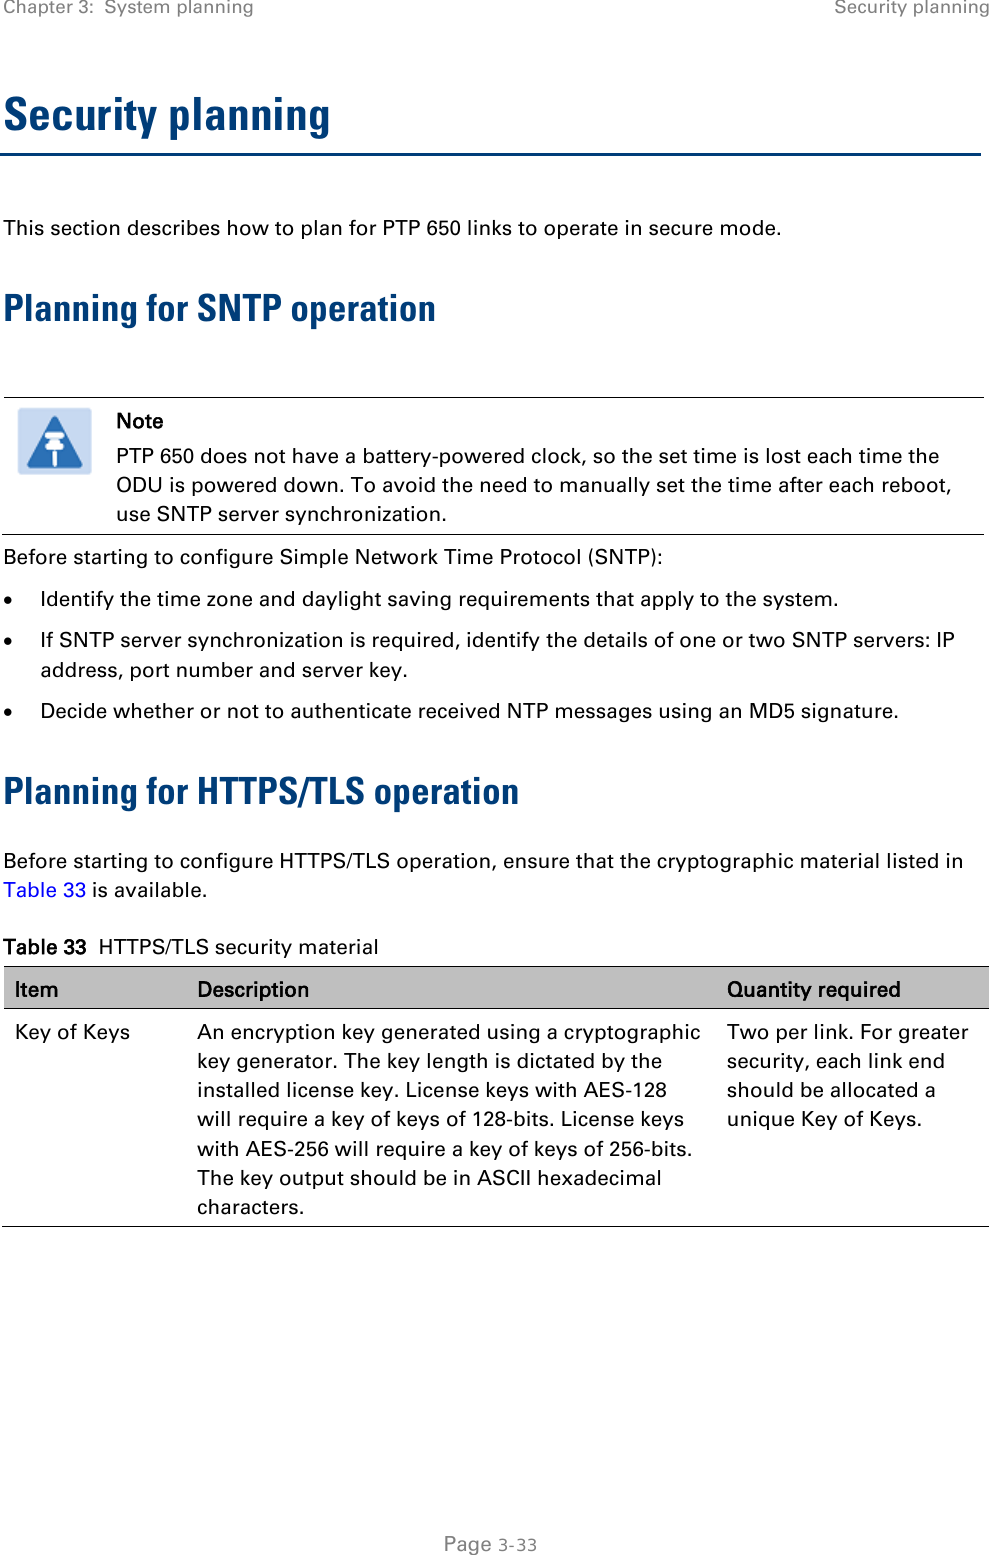 Chapter 3:  System planning Security planning  Security planning This section describes how to plan for PTP 650 links to operate in secure mode. Planning for SNTP operation   Note PTP 650 does not have a battery-powered clock, so the set time is lost each time the ODU is powered down. To avoid the need to manually set the time after each reboot, use SNTP server synchronization. Before starting to configure Simple Network Time Protocol (SNTP): • Identify the time zone and daylight saving requirements that apply to the system. • If SNTP server synchronization is required, identify the details of one or two SNTP servers: IP address, port number and server key. • Decide whether or not to authenticate received NTP messages using an MD5 signature. Planning for HTTPS/TLS operation Before starting to configure HTTPS/TLS operation, ensure that the cryptographic material listed in Table 33 is available. Table 33  HTTPS/TLS security material Item Description Quantity required Key of Keys An encryption key generated using a cryptographic key generator. The key length is dictated by the installed license key. License keys with AES-128 will require a key of keys of 128-bits. License keys with AES-256 will require a key of keys of 256-bits. The key output should be in ASCII hexadecimal characters. Two per link. For greater security, each link end should be allocated a unique Key of Keys.  Page 3-33 